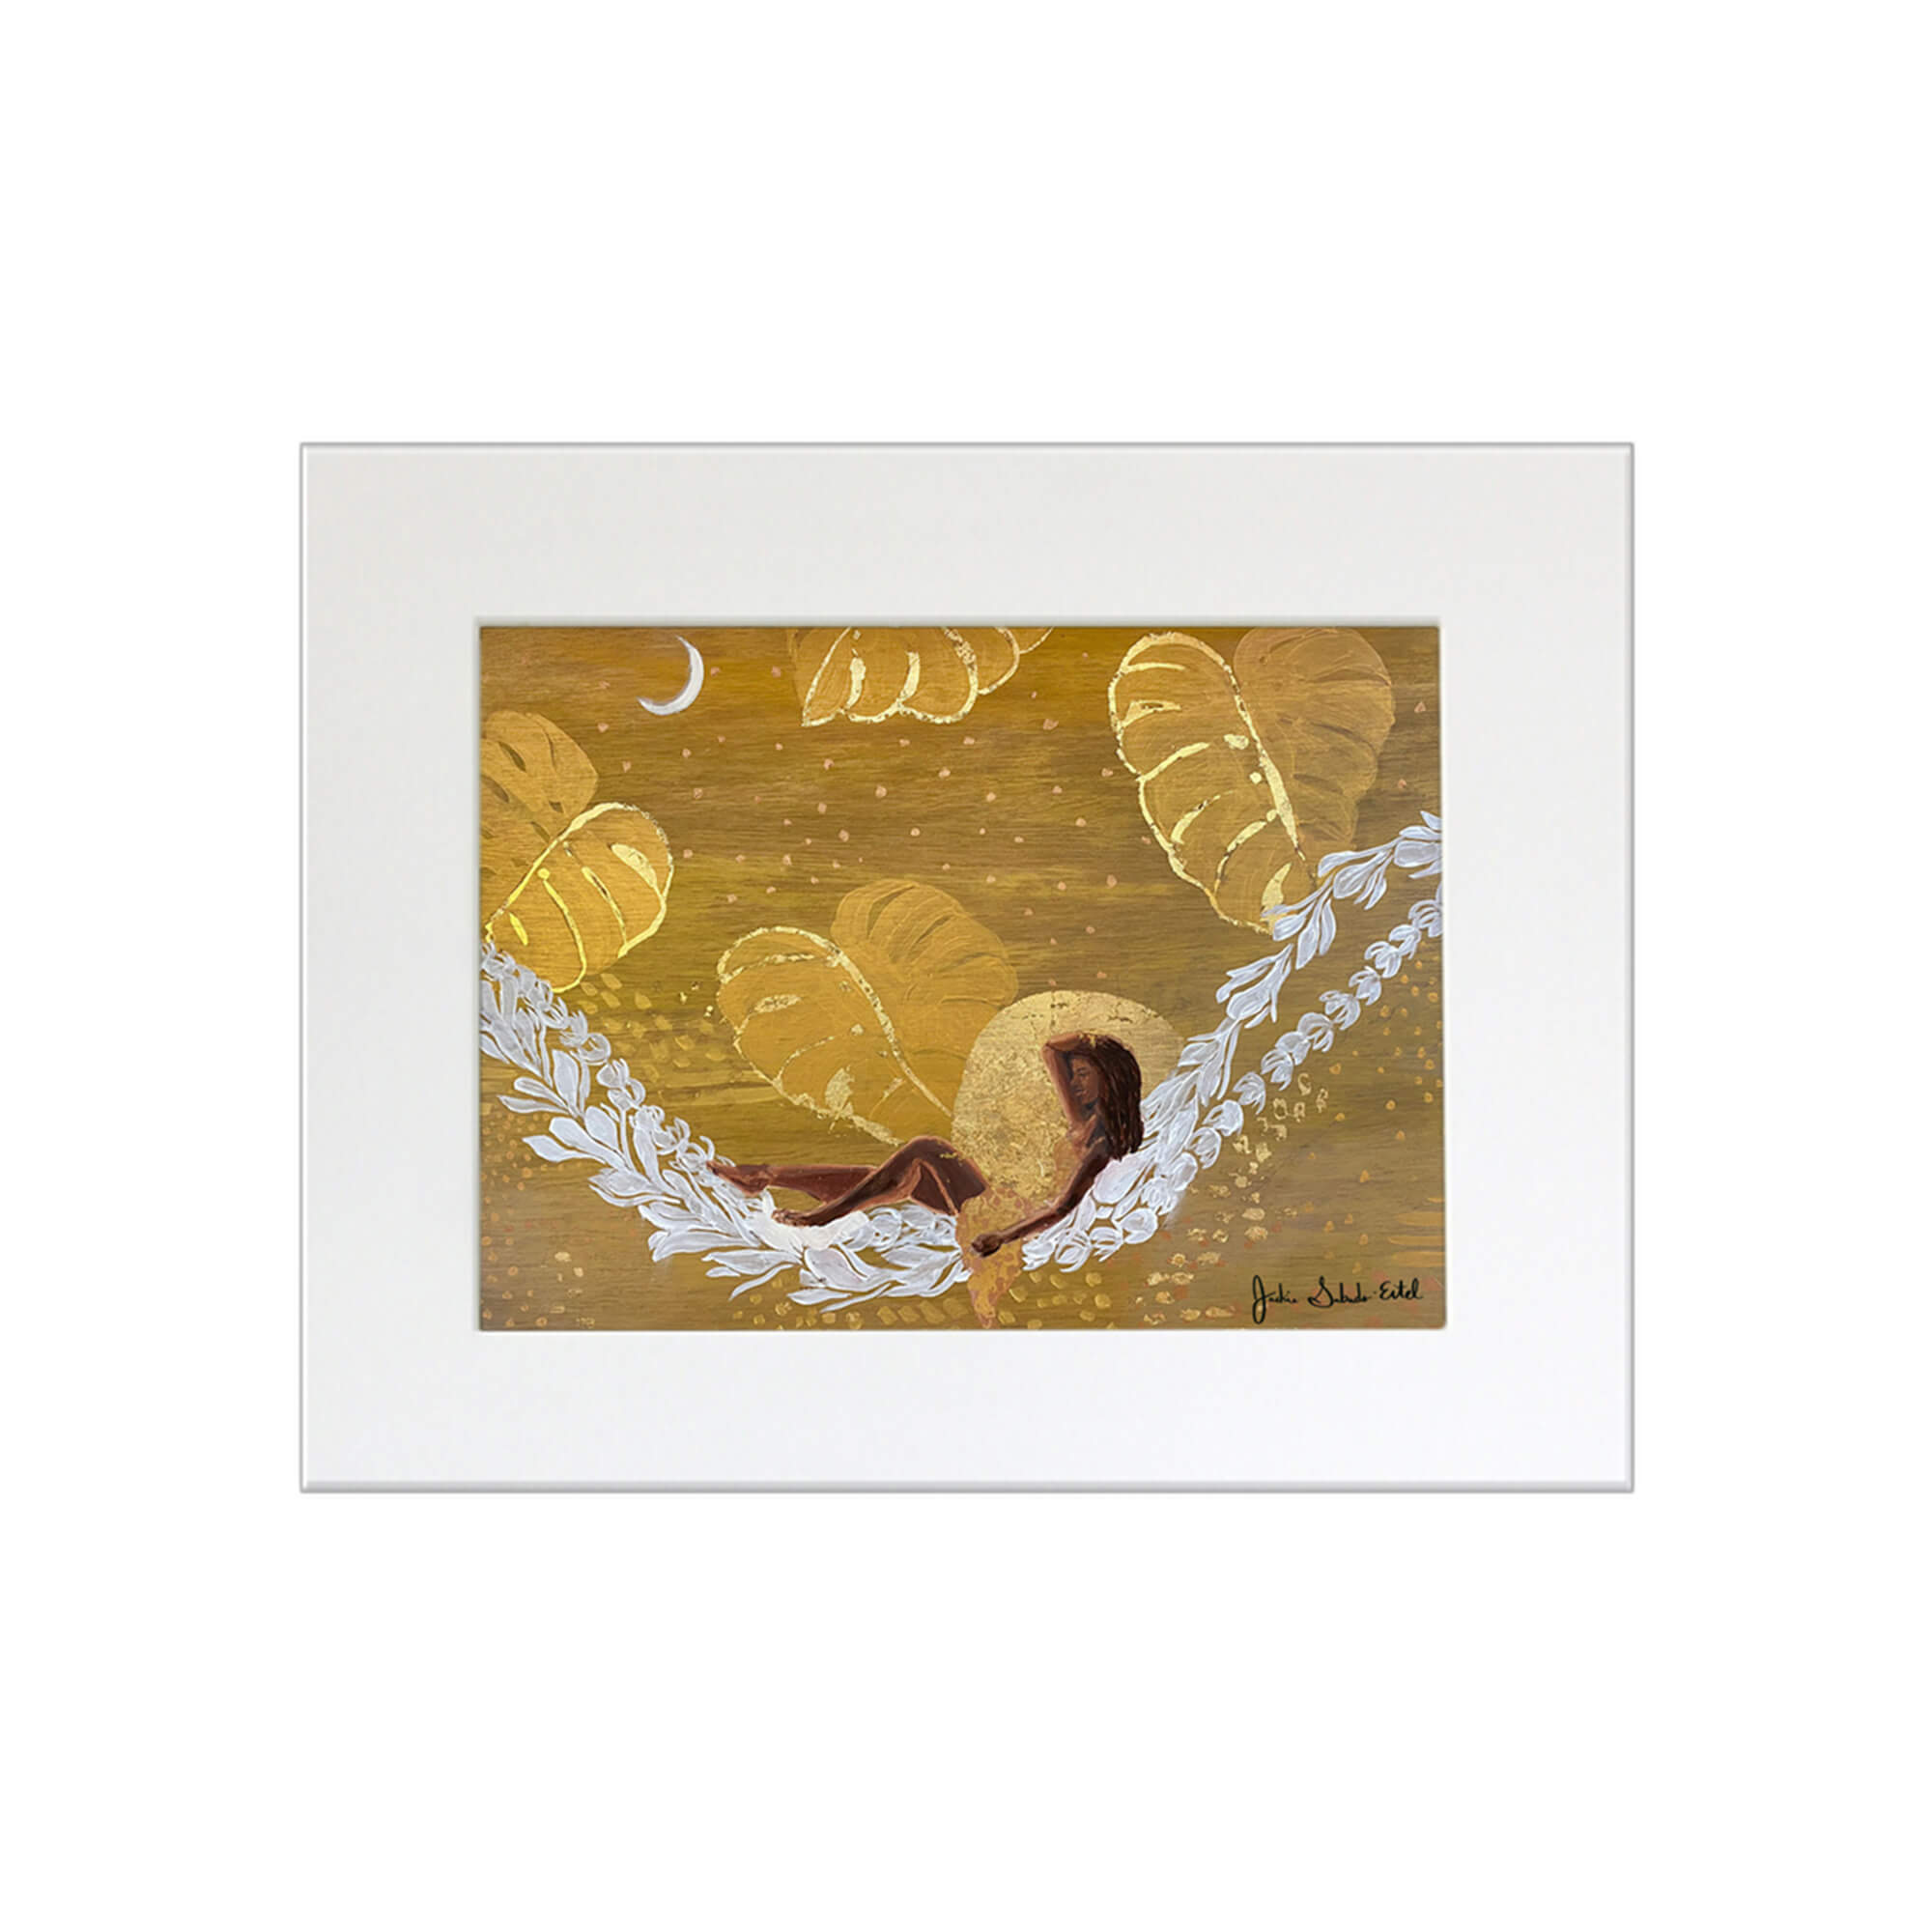 A matted art print featuring a woman relaxing on a lei hammock with monstera leaves backdrop and some gold touchups by Hawaii artist Jackie Eitel